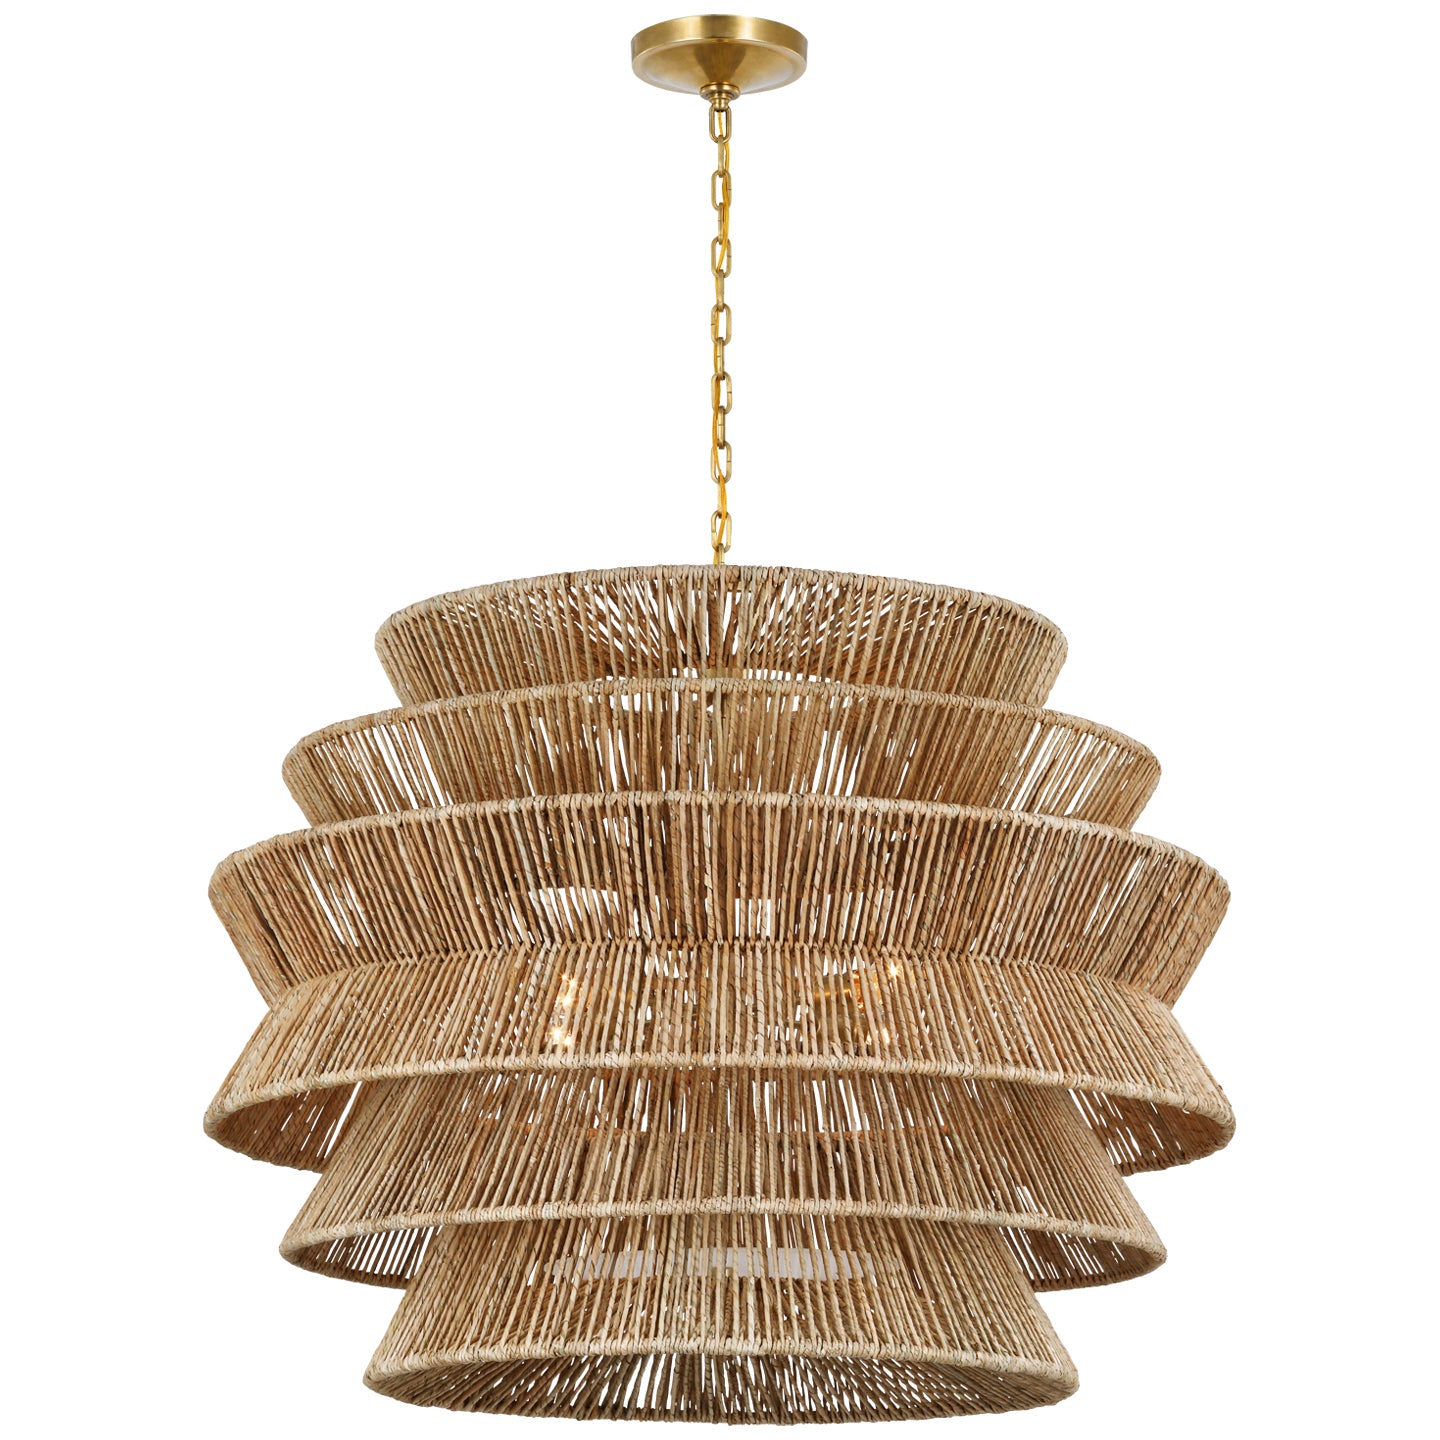 Visual Comfort Signature - CHC 5017AB/NAB - LED Chandelier - Antigua - Antique-Burnished Brass and Natural Abaca